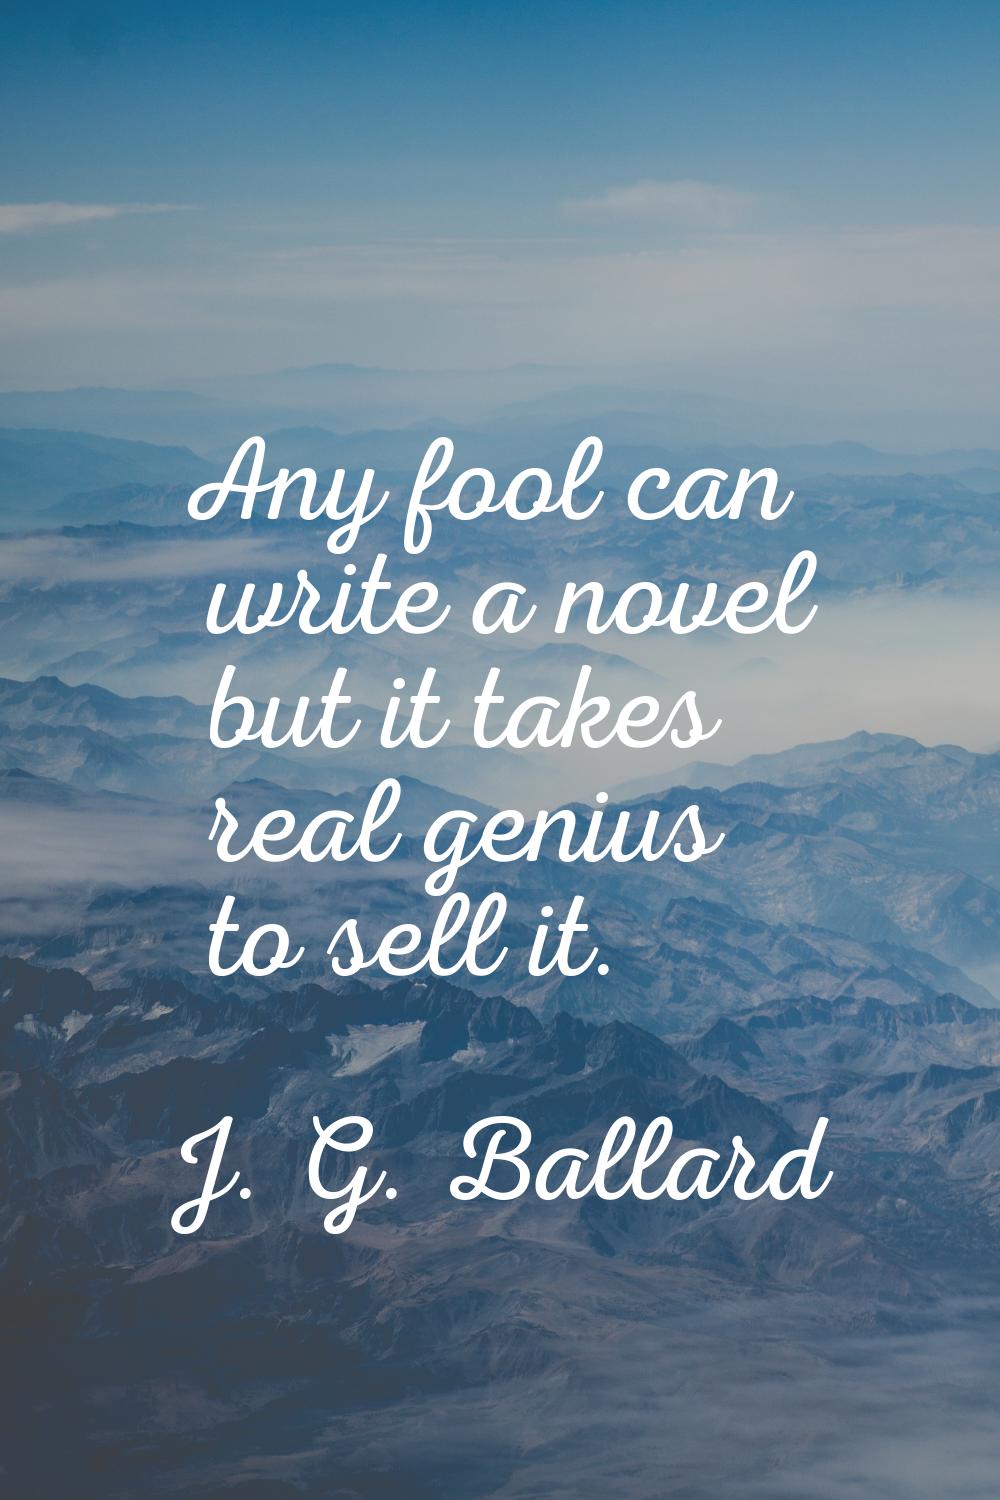 Any fool can write a novel but it takes real genius to sell it.